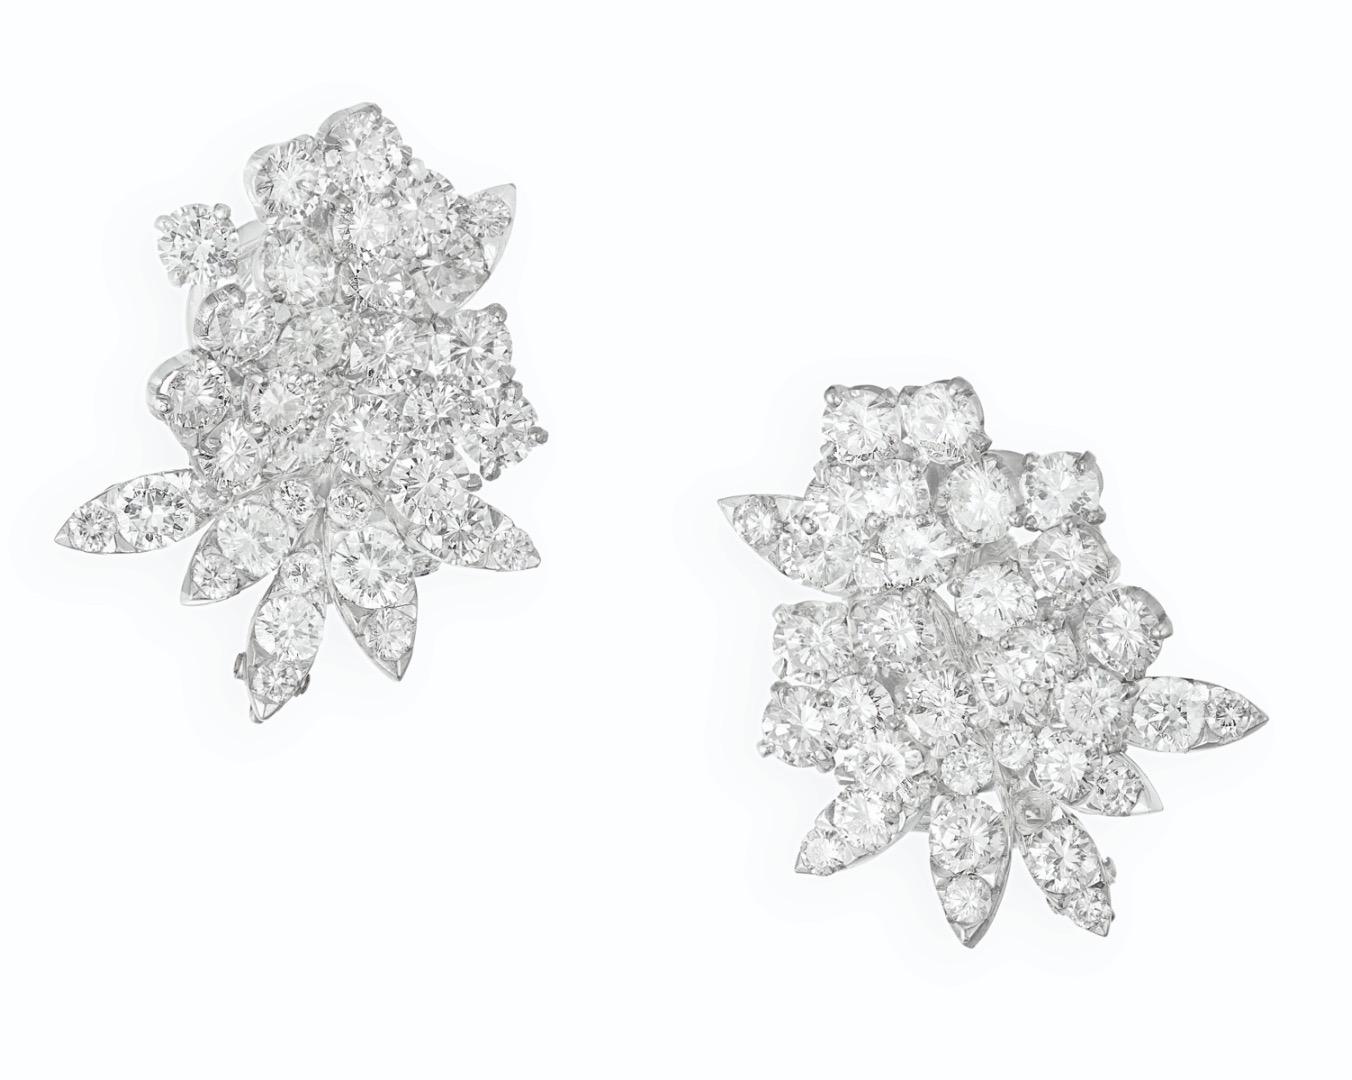 Van Cleef & Arpels Diamond Flower Earrings.
 This pair of earrings has circular- cut diamonds weight approximately 9-10ct all set in 18k white gold.
 Signed:  Van Cleef & Arpels & numbered xxxxxx
Maker's mark and French Hallmark
 Measurements: 1.00